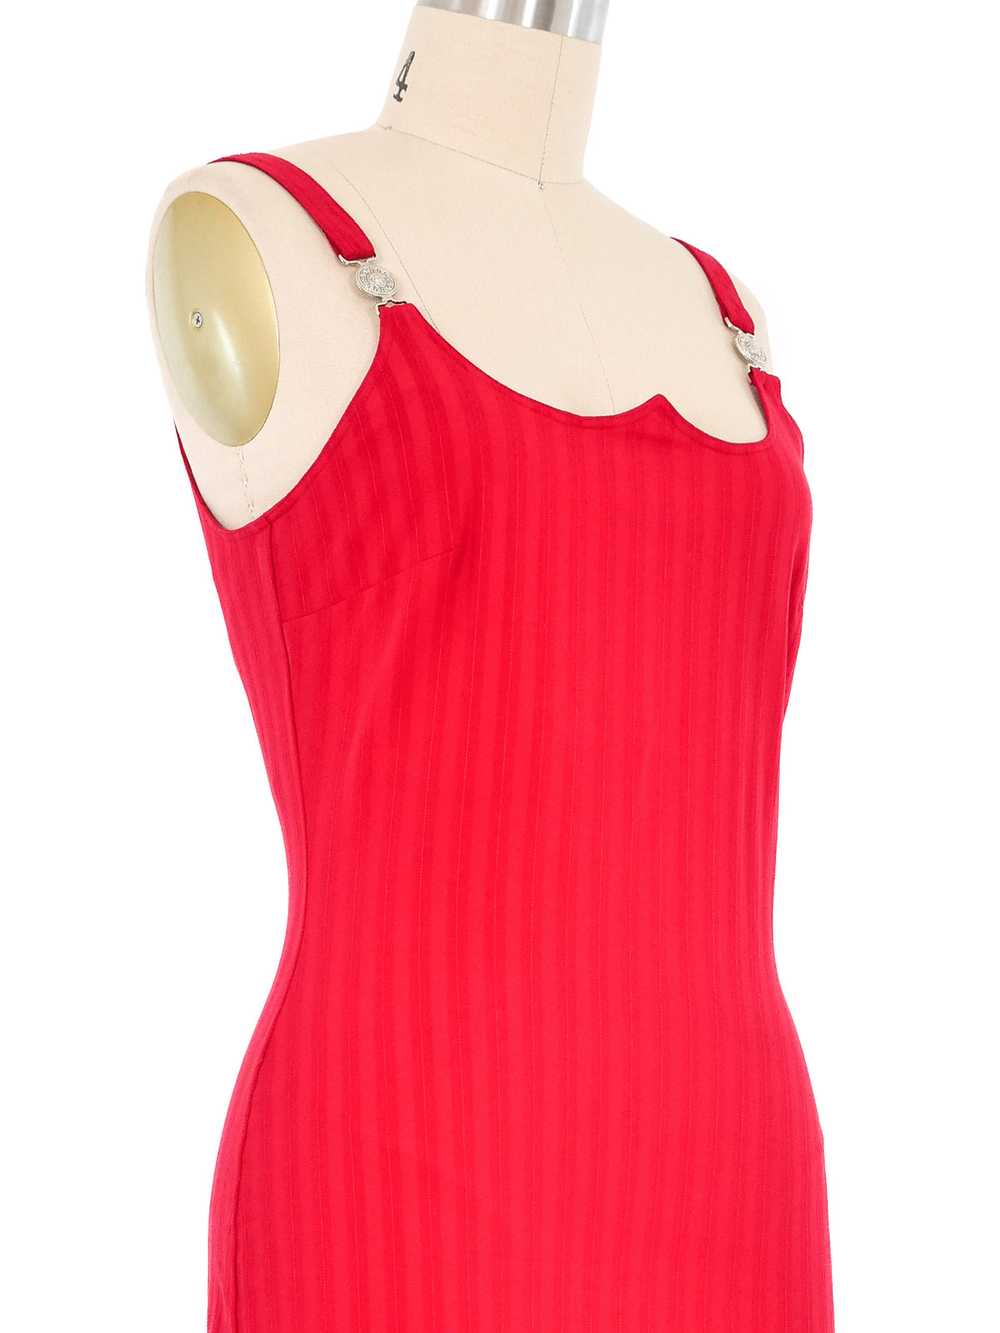 Versace Jeans Couture Red Striped Bodycon Dress - image 2